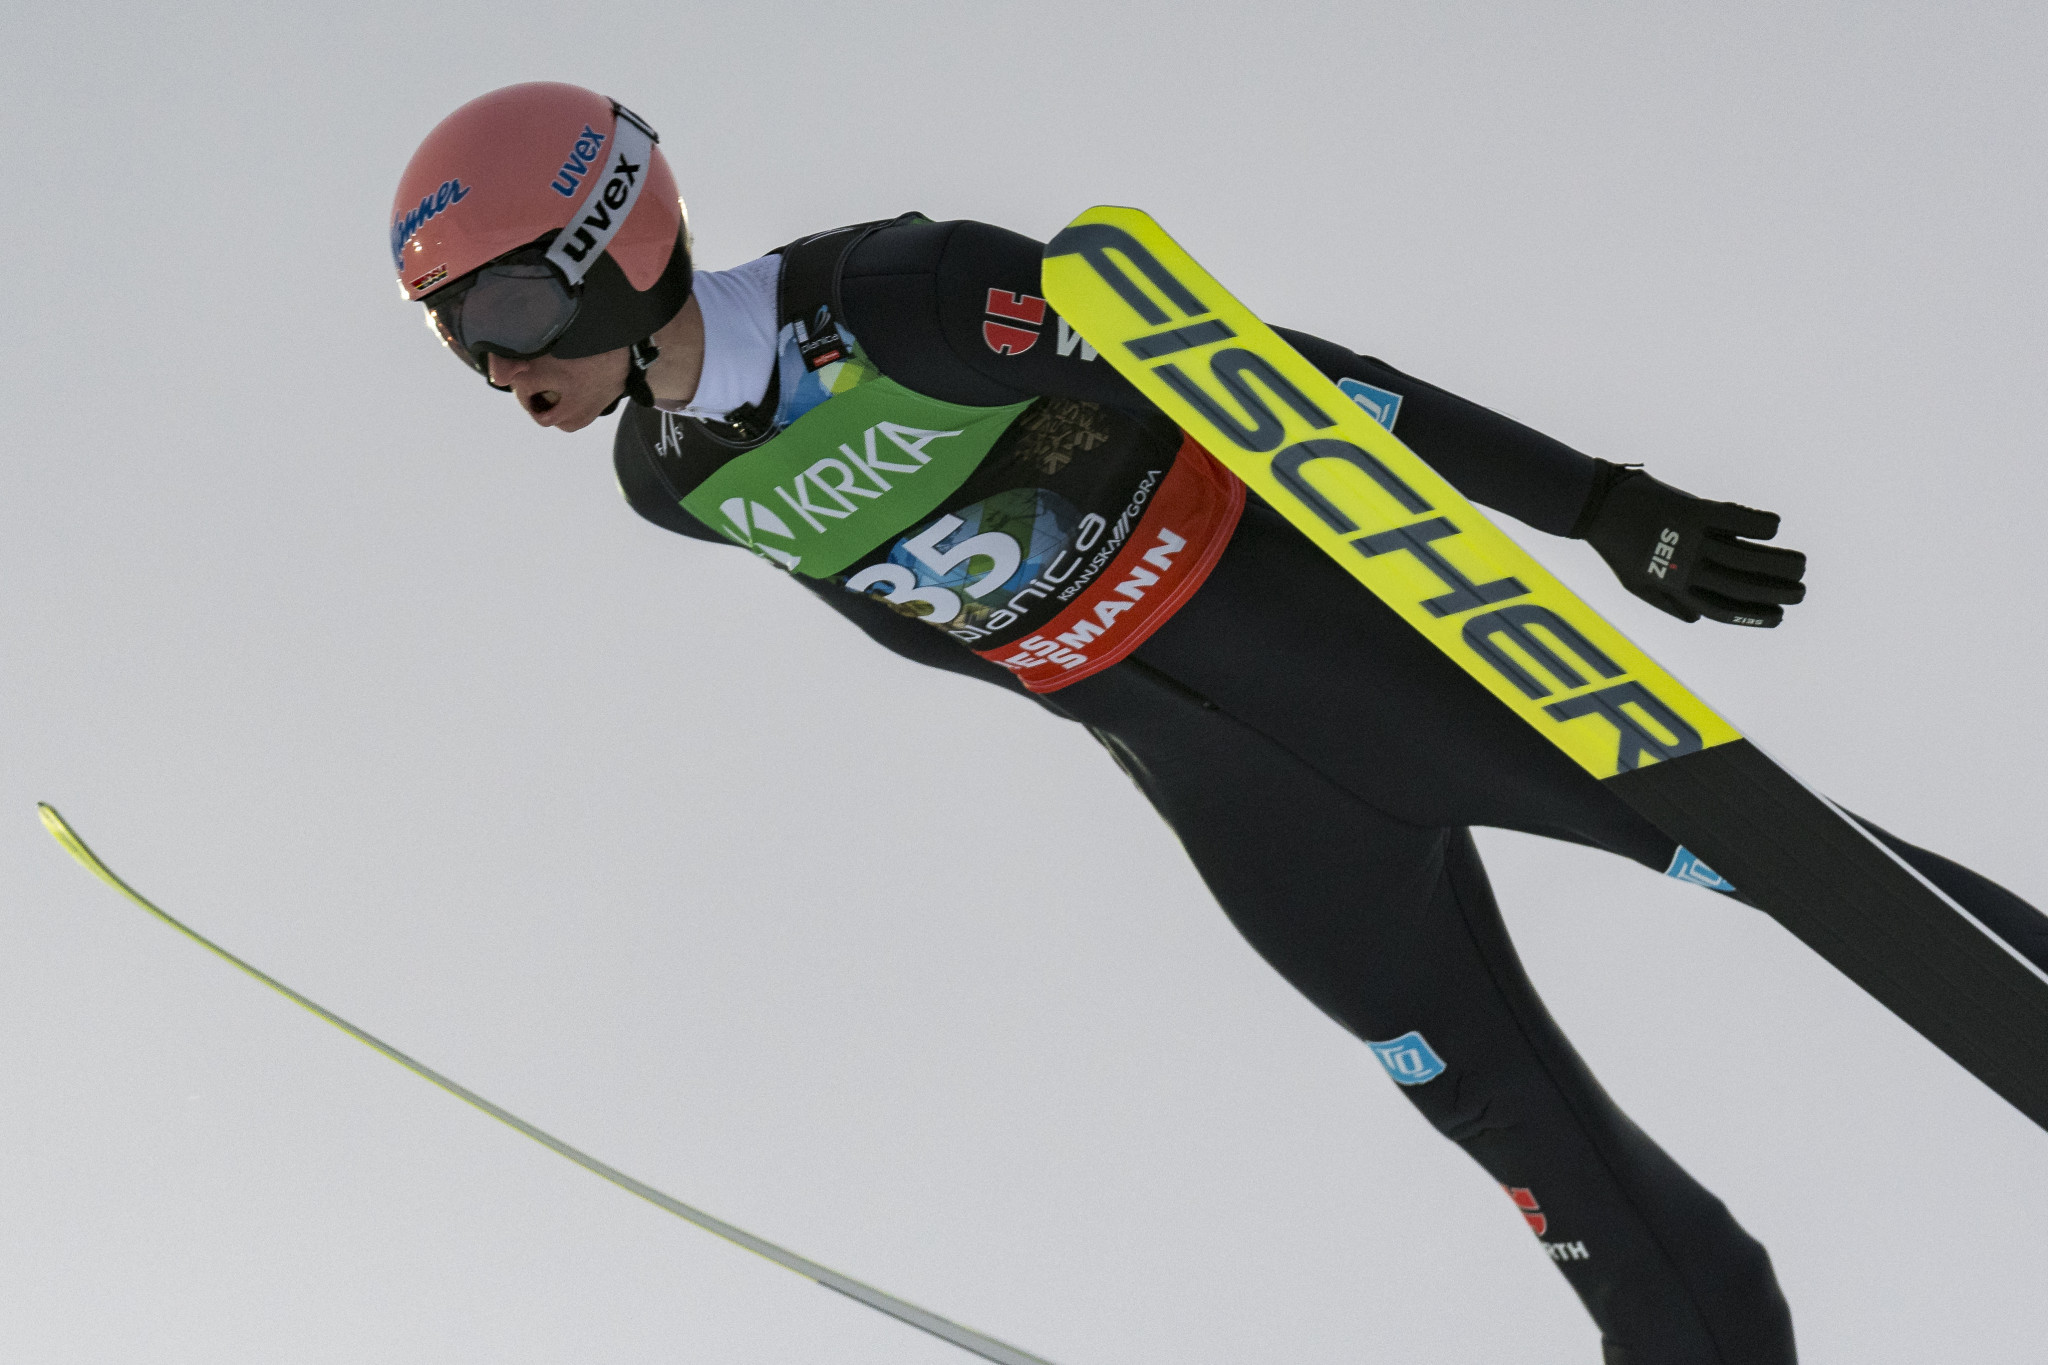 Karl Geiger won the individual title at the FIS Ski Flying World Championships ©Getty Images